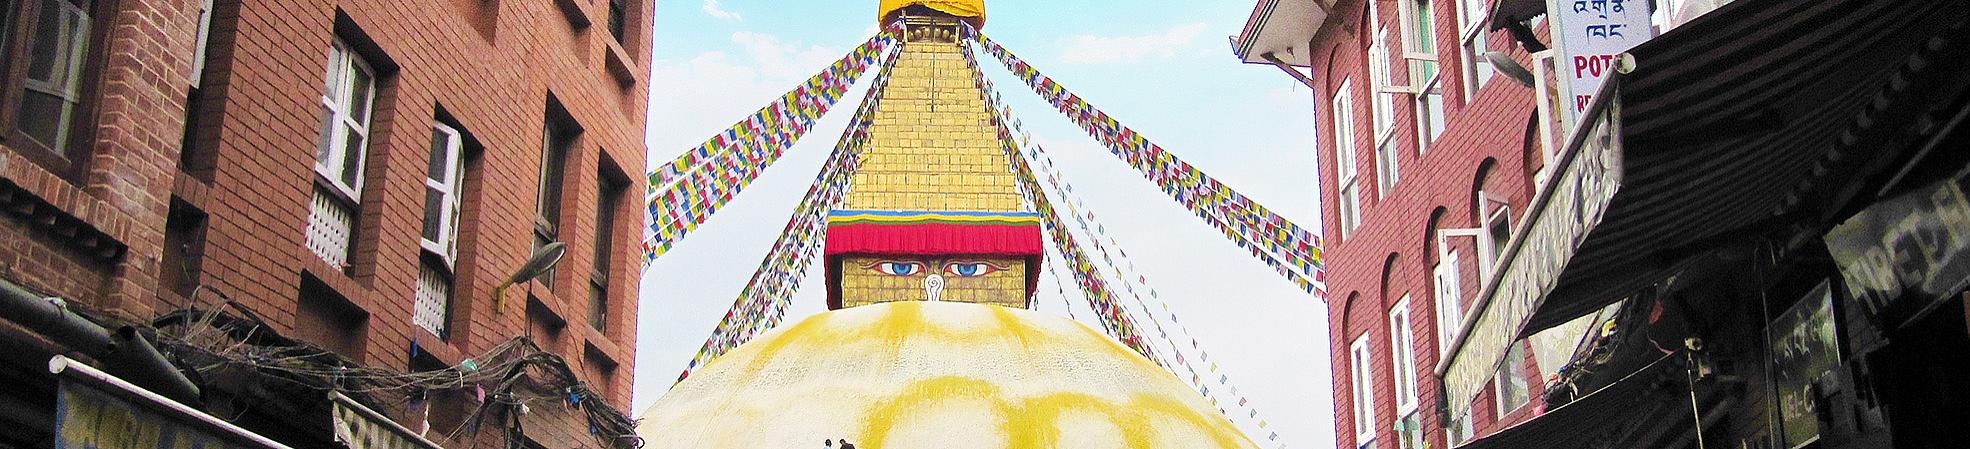 Nepal to Complete the Reconstruction of Boudhanath Stupa